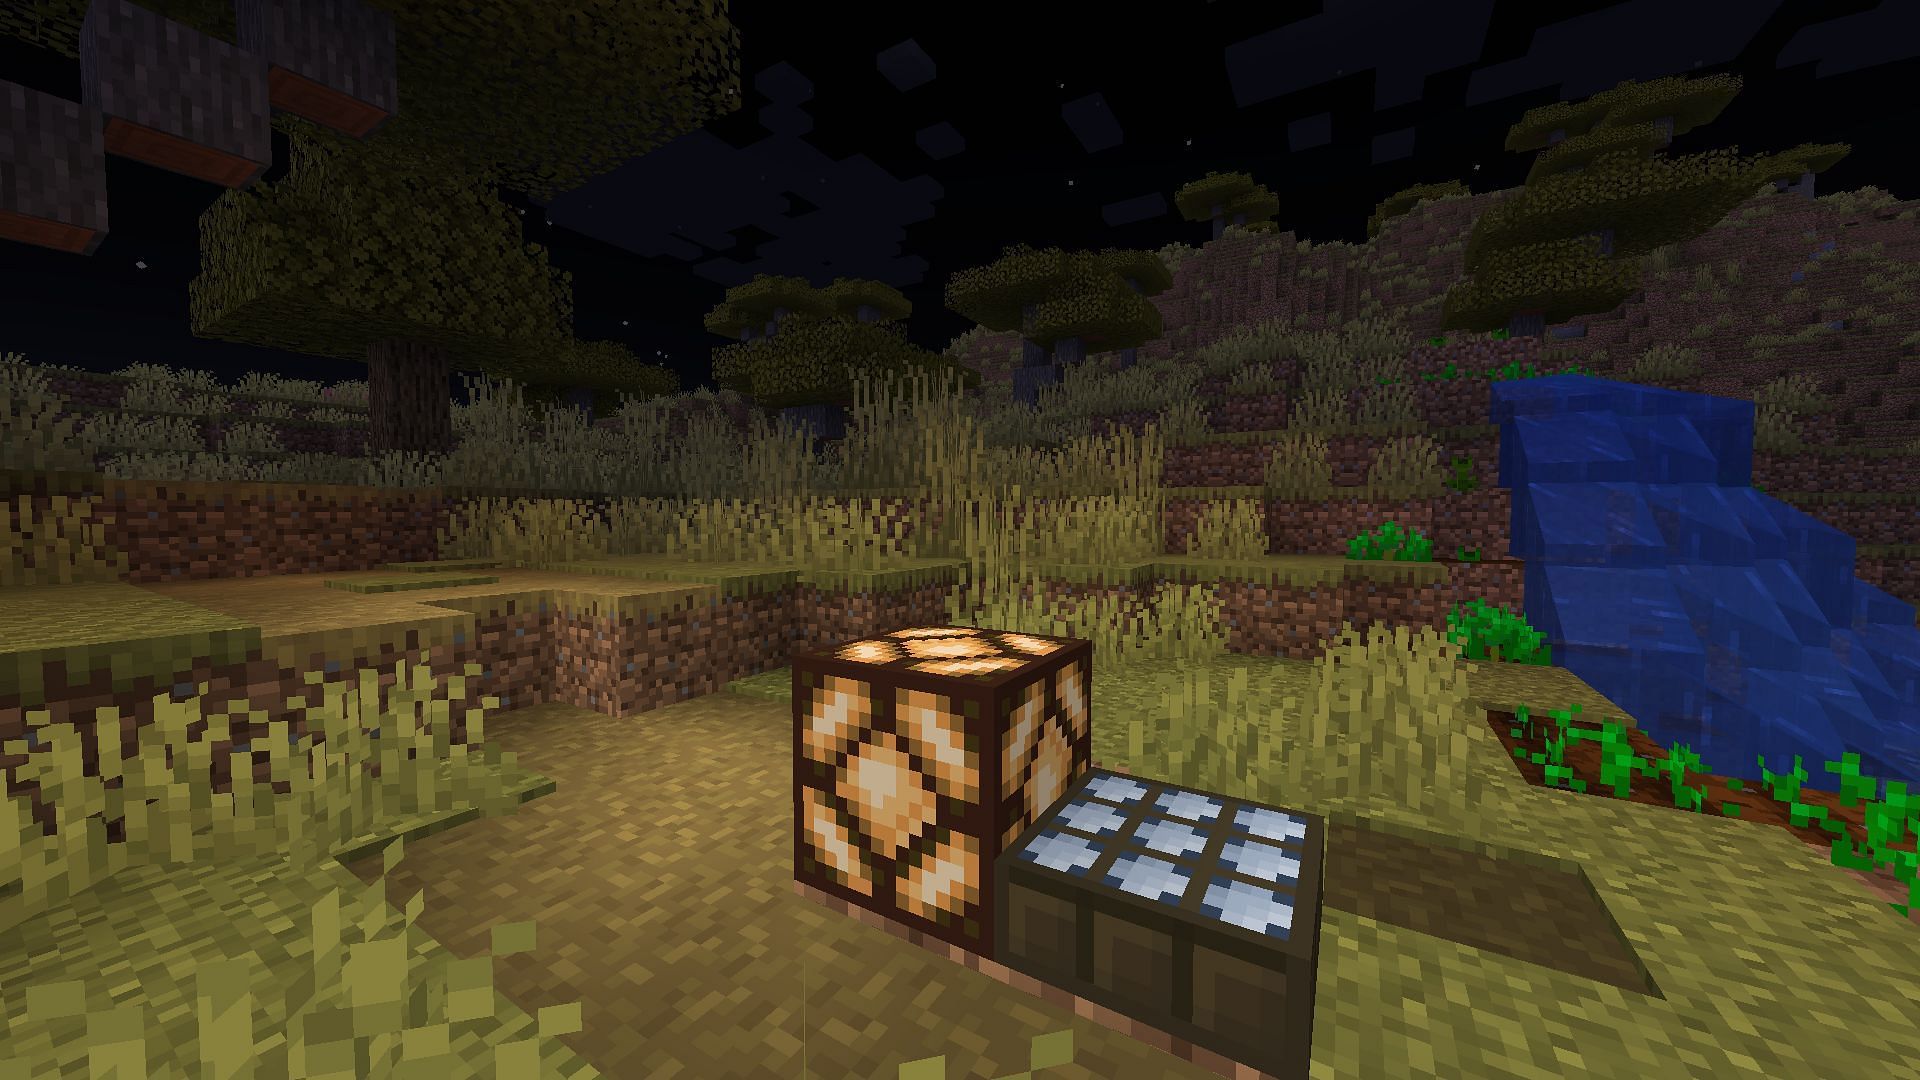 Automatic redstone lamp with daylight sensor in Minecraft (Image via Mojang)